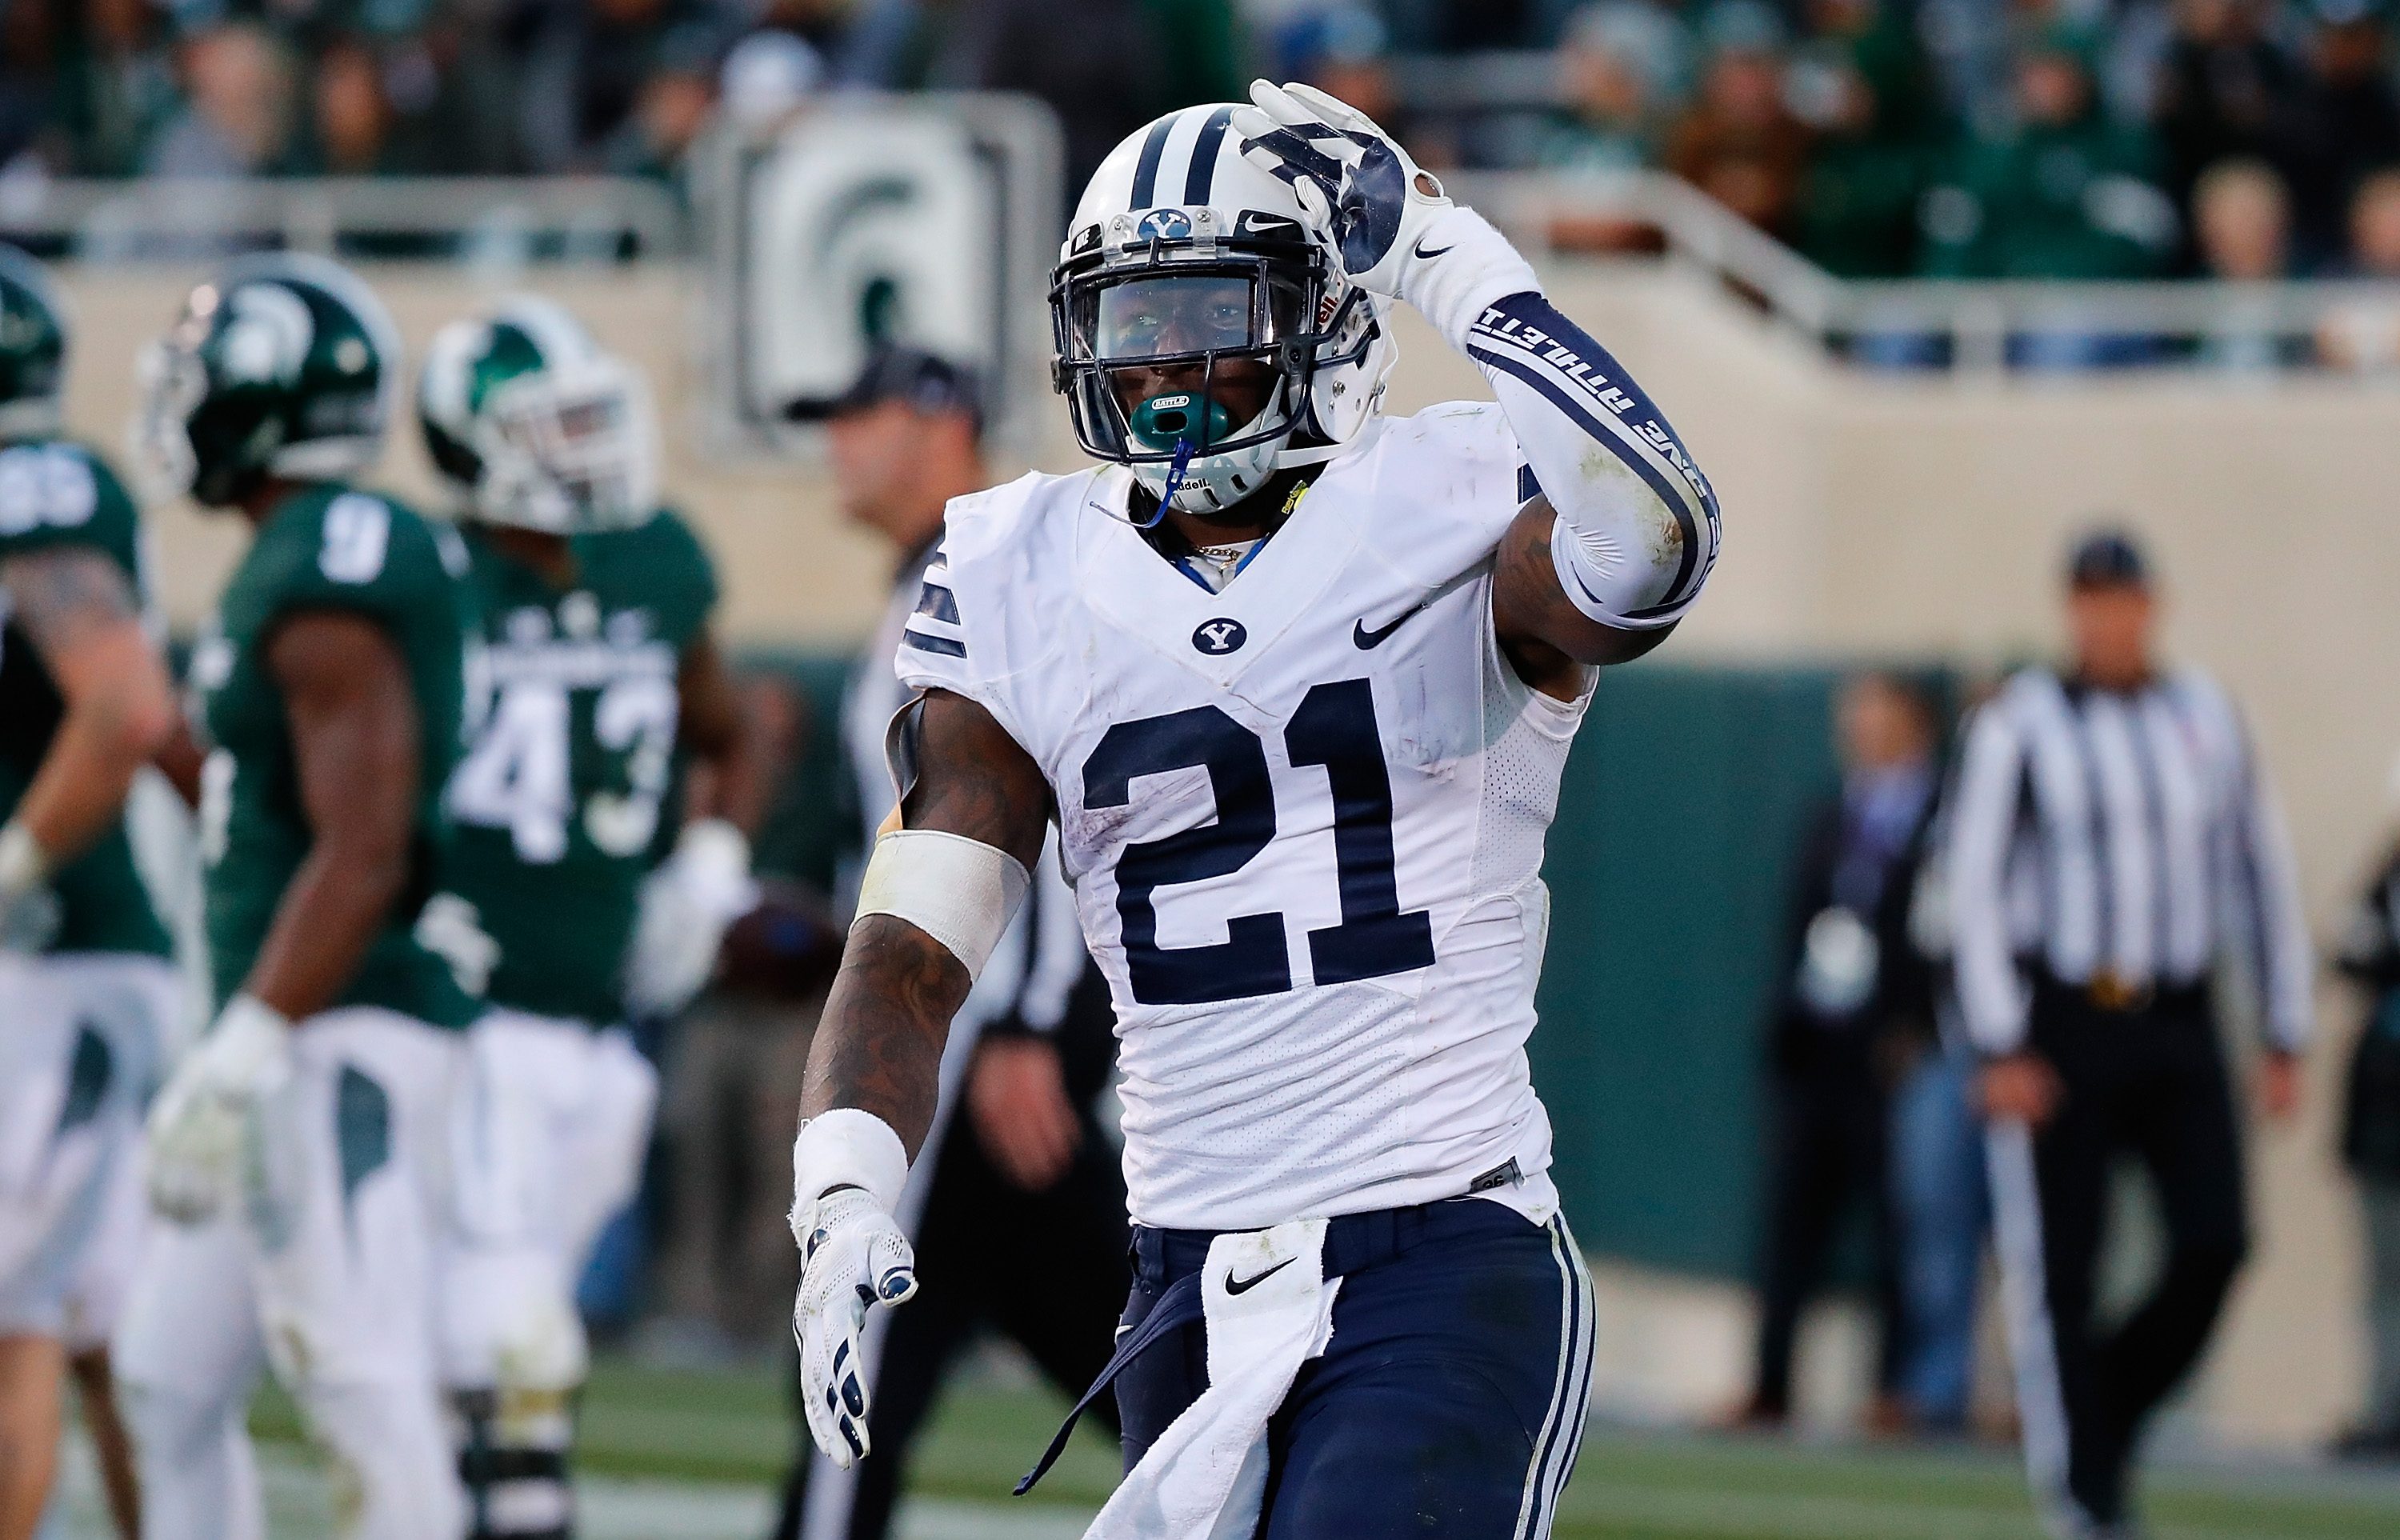 Jamaal Williams #21 of the Brigham Young Cougars celebrates a win.